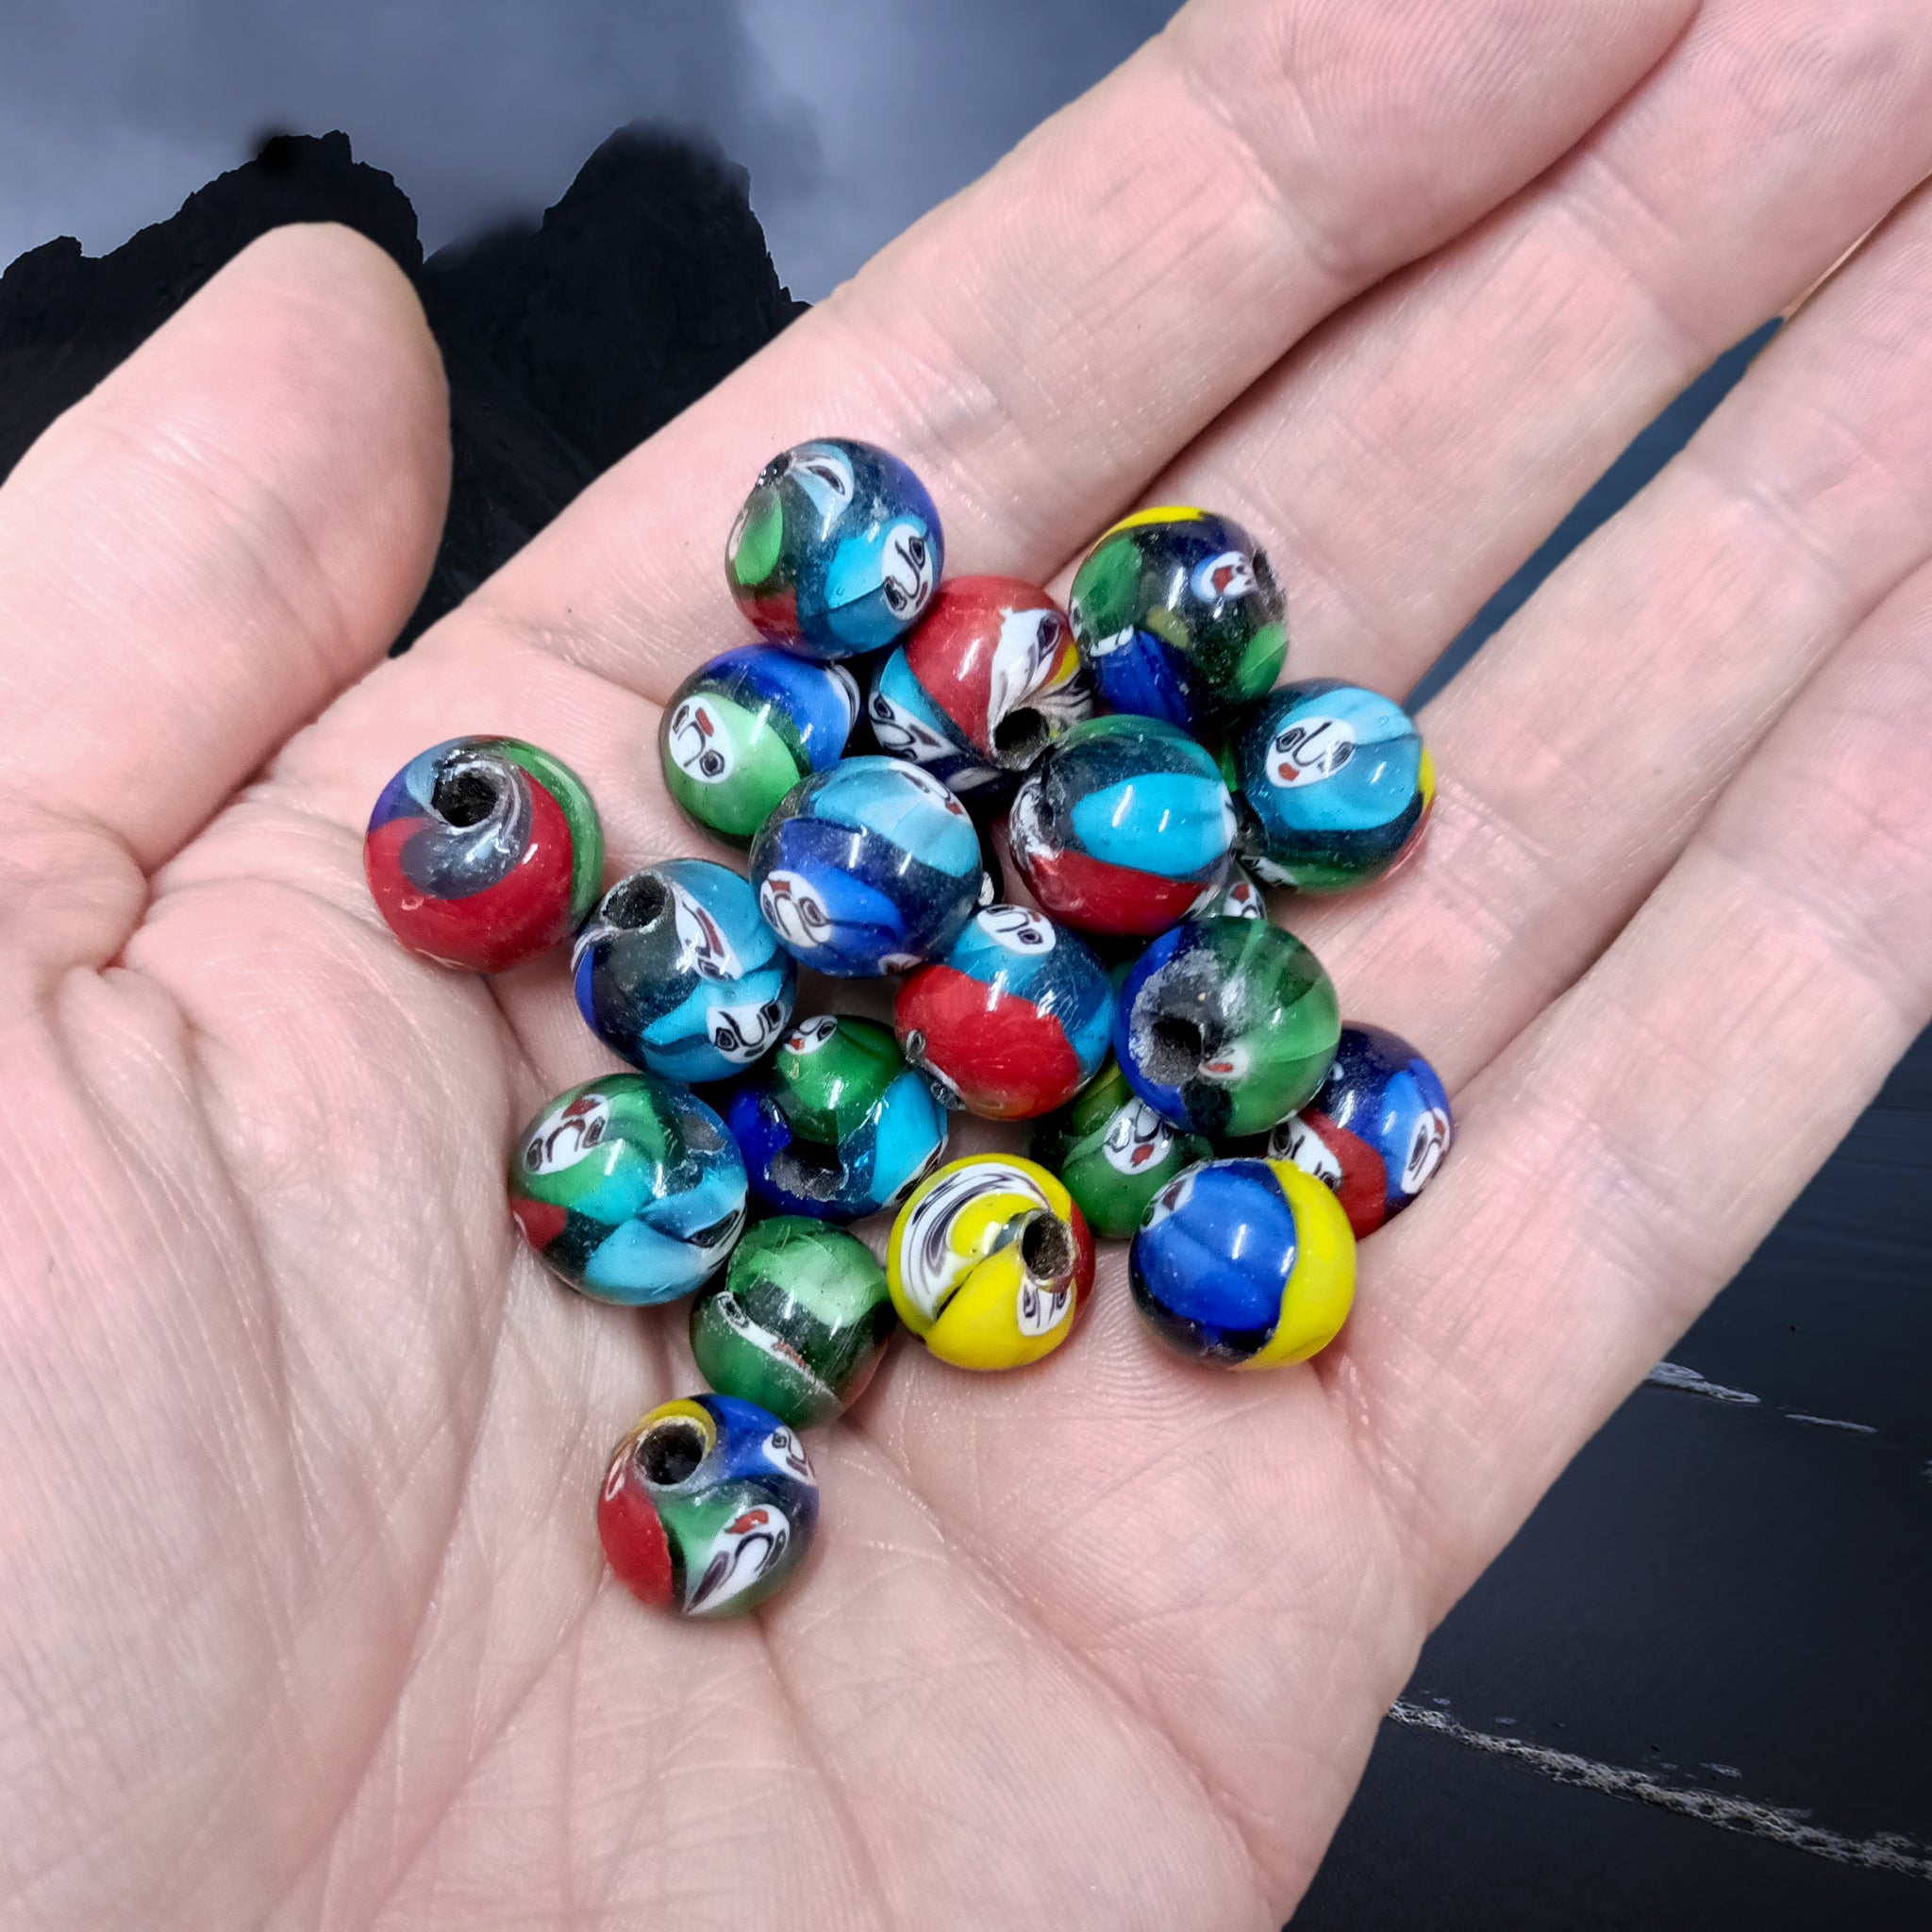 Small Hand-Painted Glass Replica Viking Beads from Birka on Hand